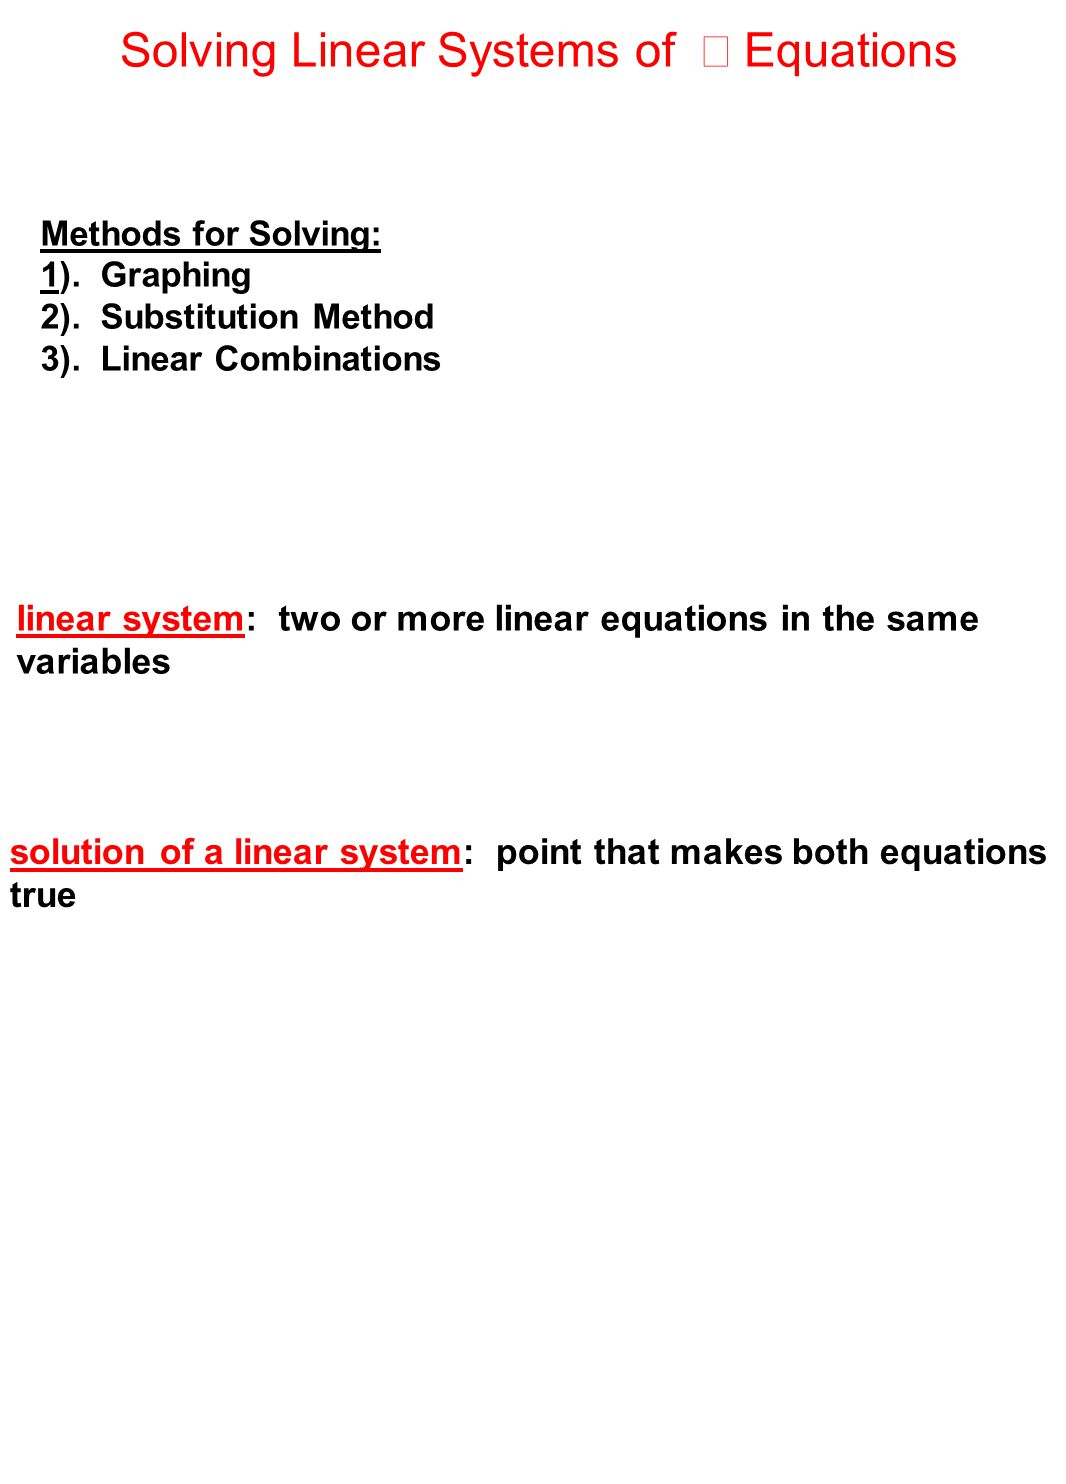 Solving Linear Systems of Equations